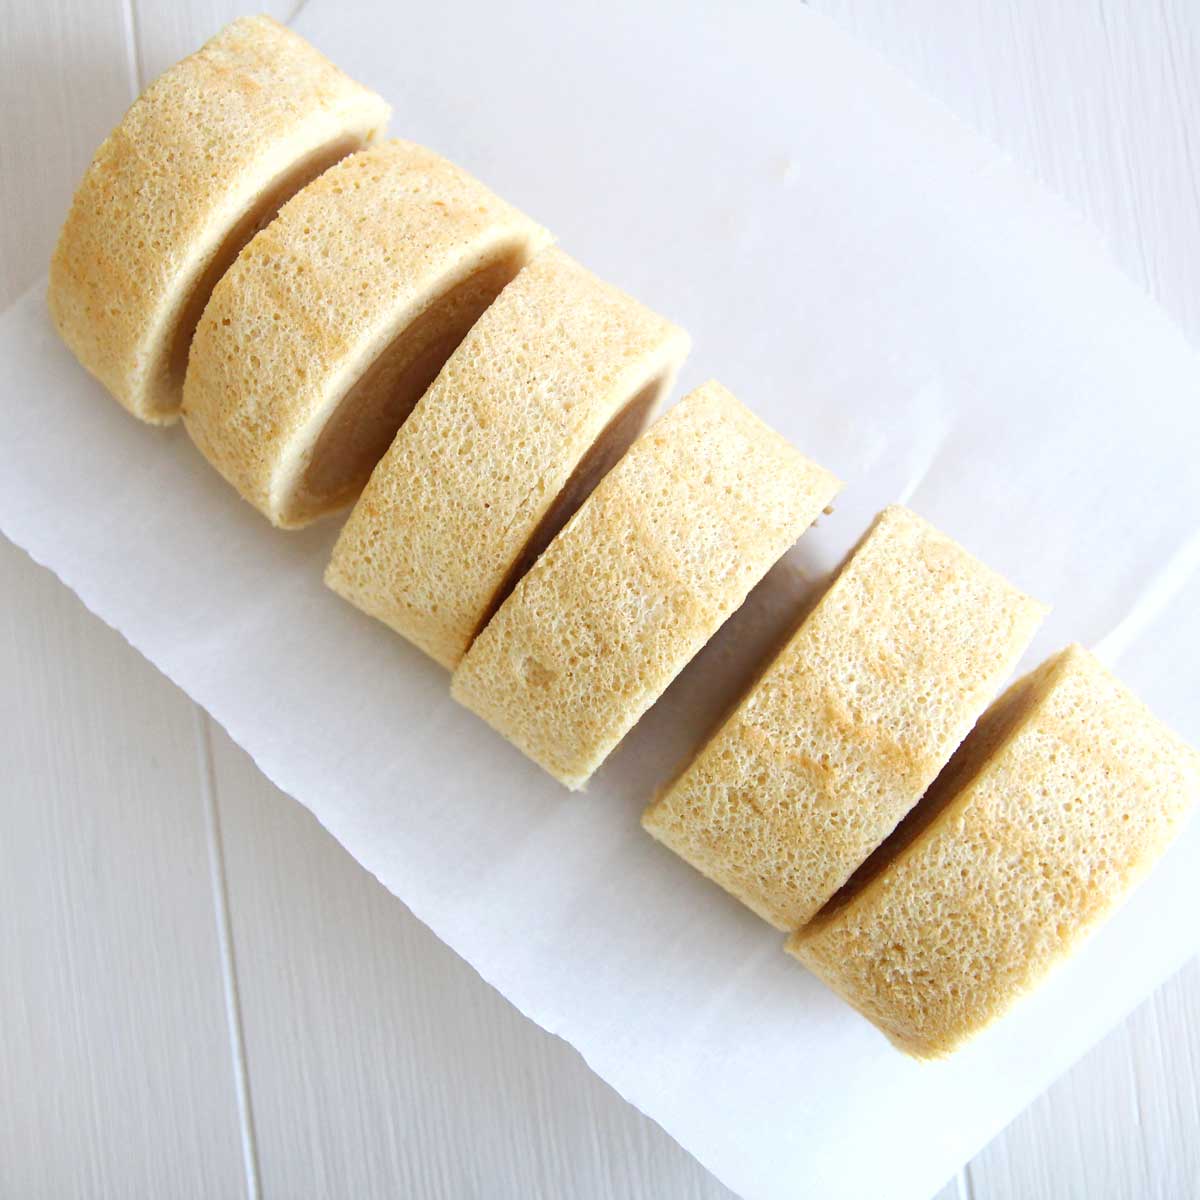 Flourless Peanut Butter Swiss Roll Cake with a Sweet Peanut Cream Filling - Strawberry Japanese Roll Cake